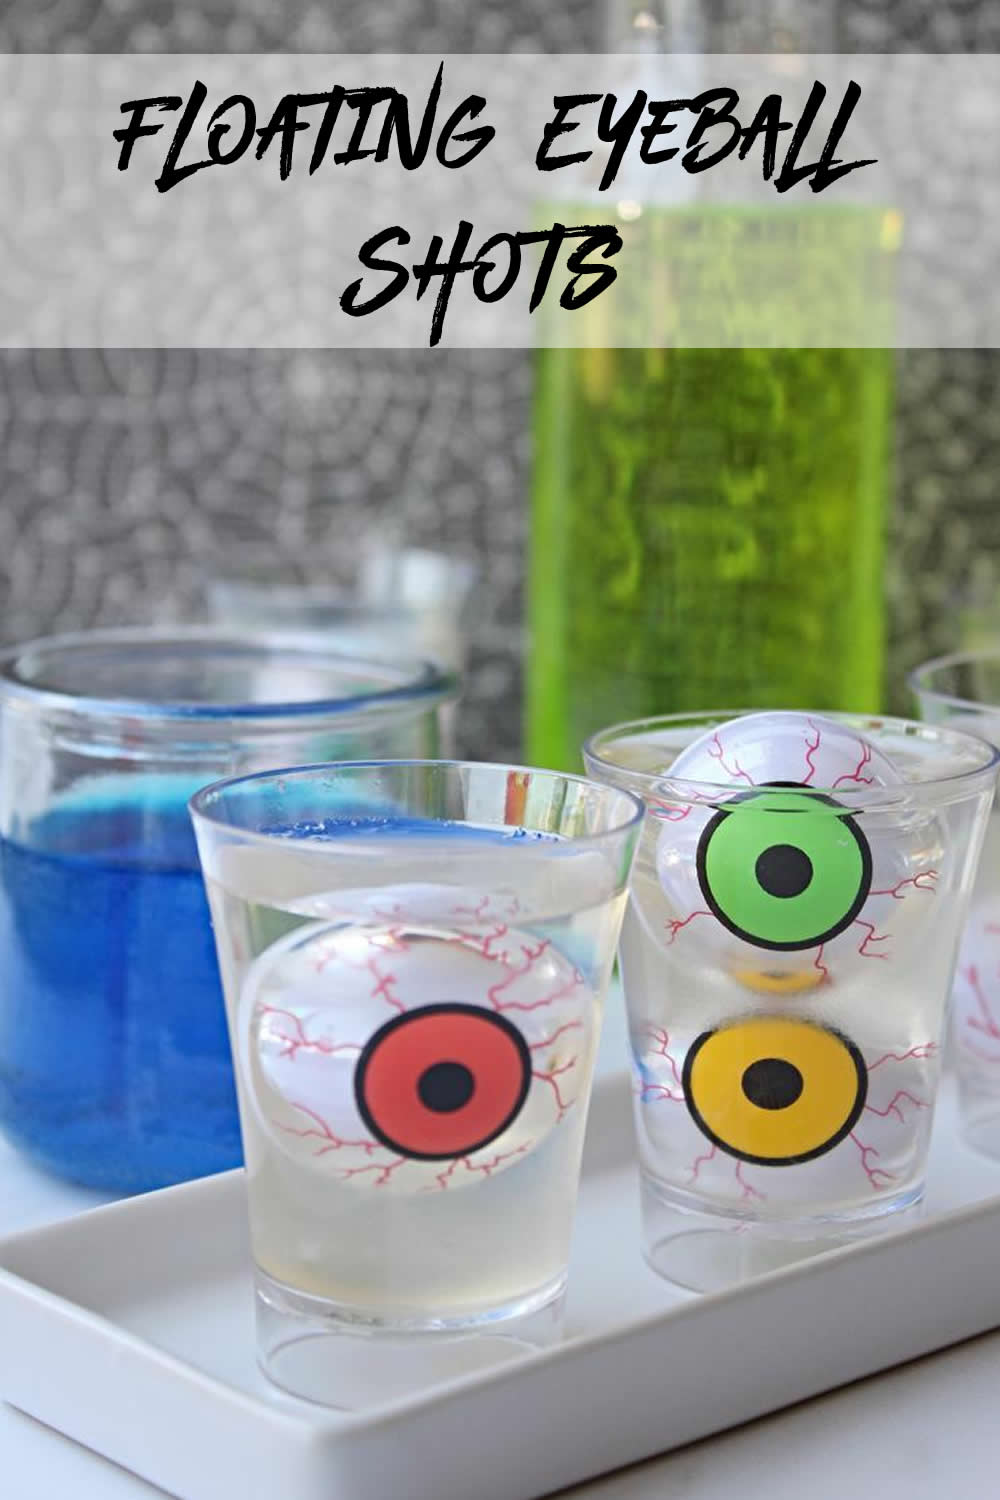 Easy eyeball vodka Jello shots recipe for your Halloween parties. Make floating eyeballs with this simple vodka alcoholic shots recipe. These creepy and spooky alcohol shots will make you the hit of your party.